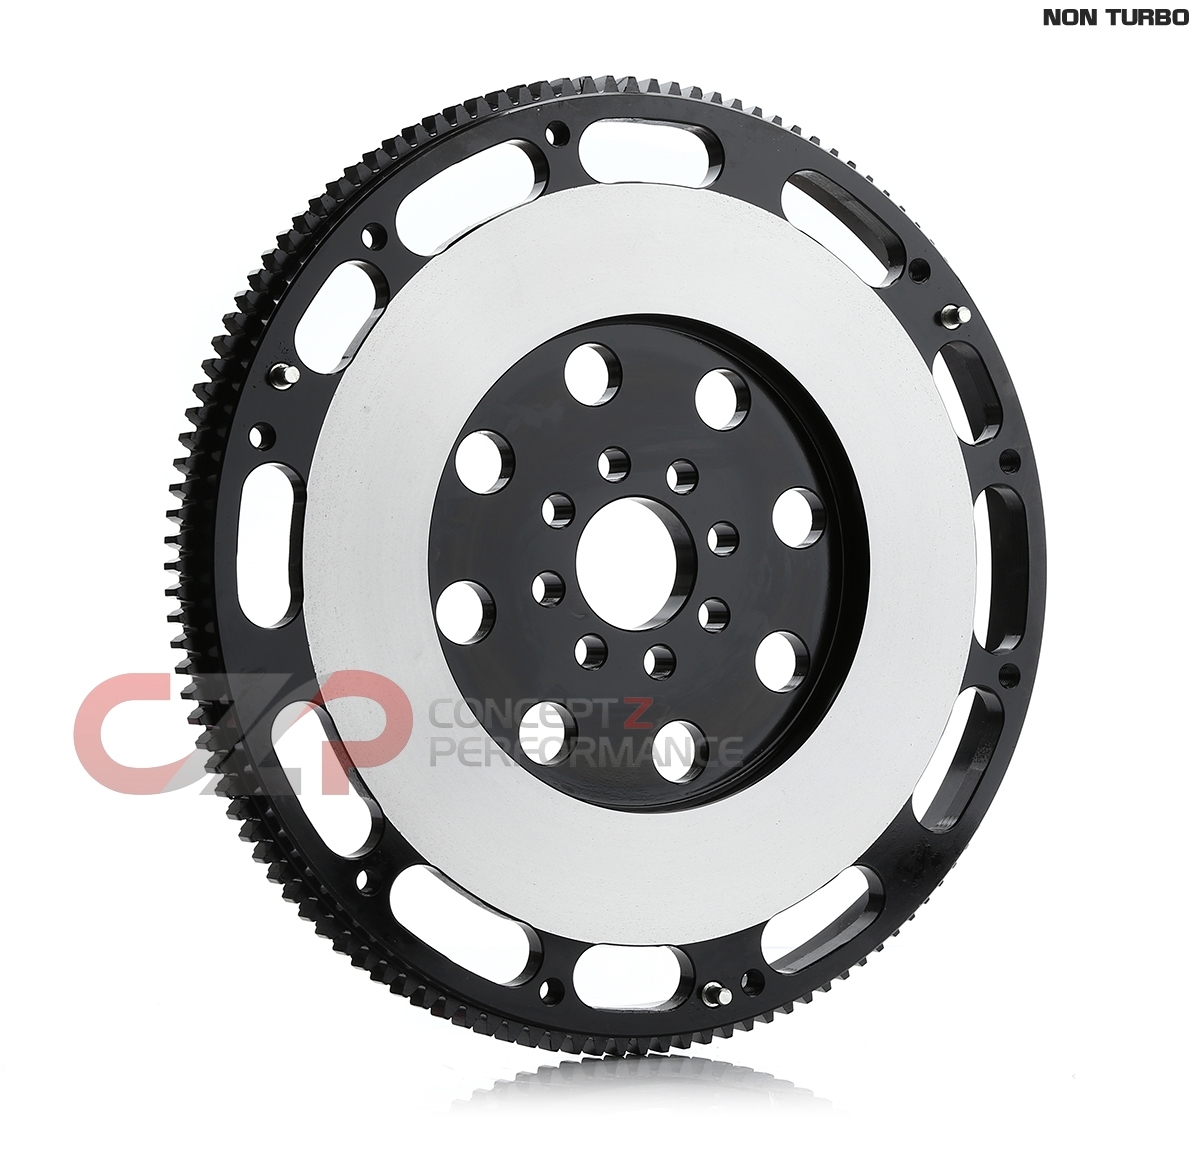 Clutch Kit Exedy V411PD for Nissan 300ZX 1991 1990 1993 1995 1992 1994 1996